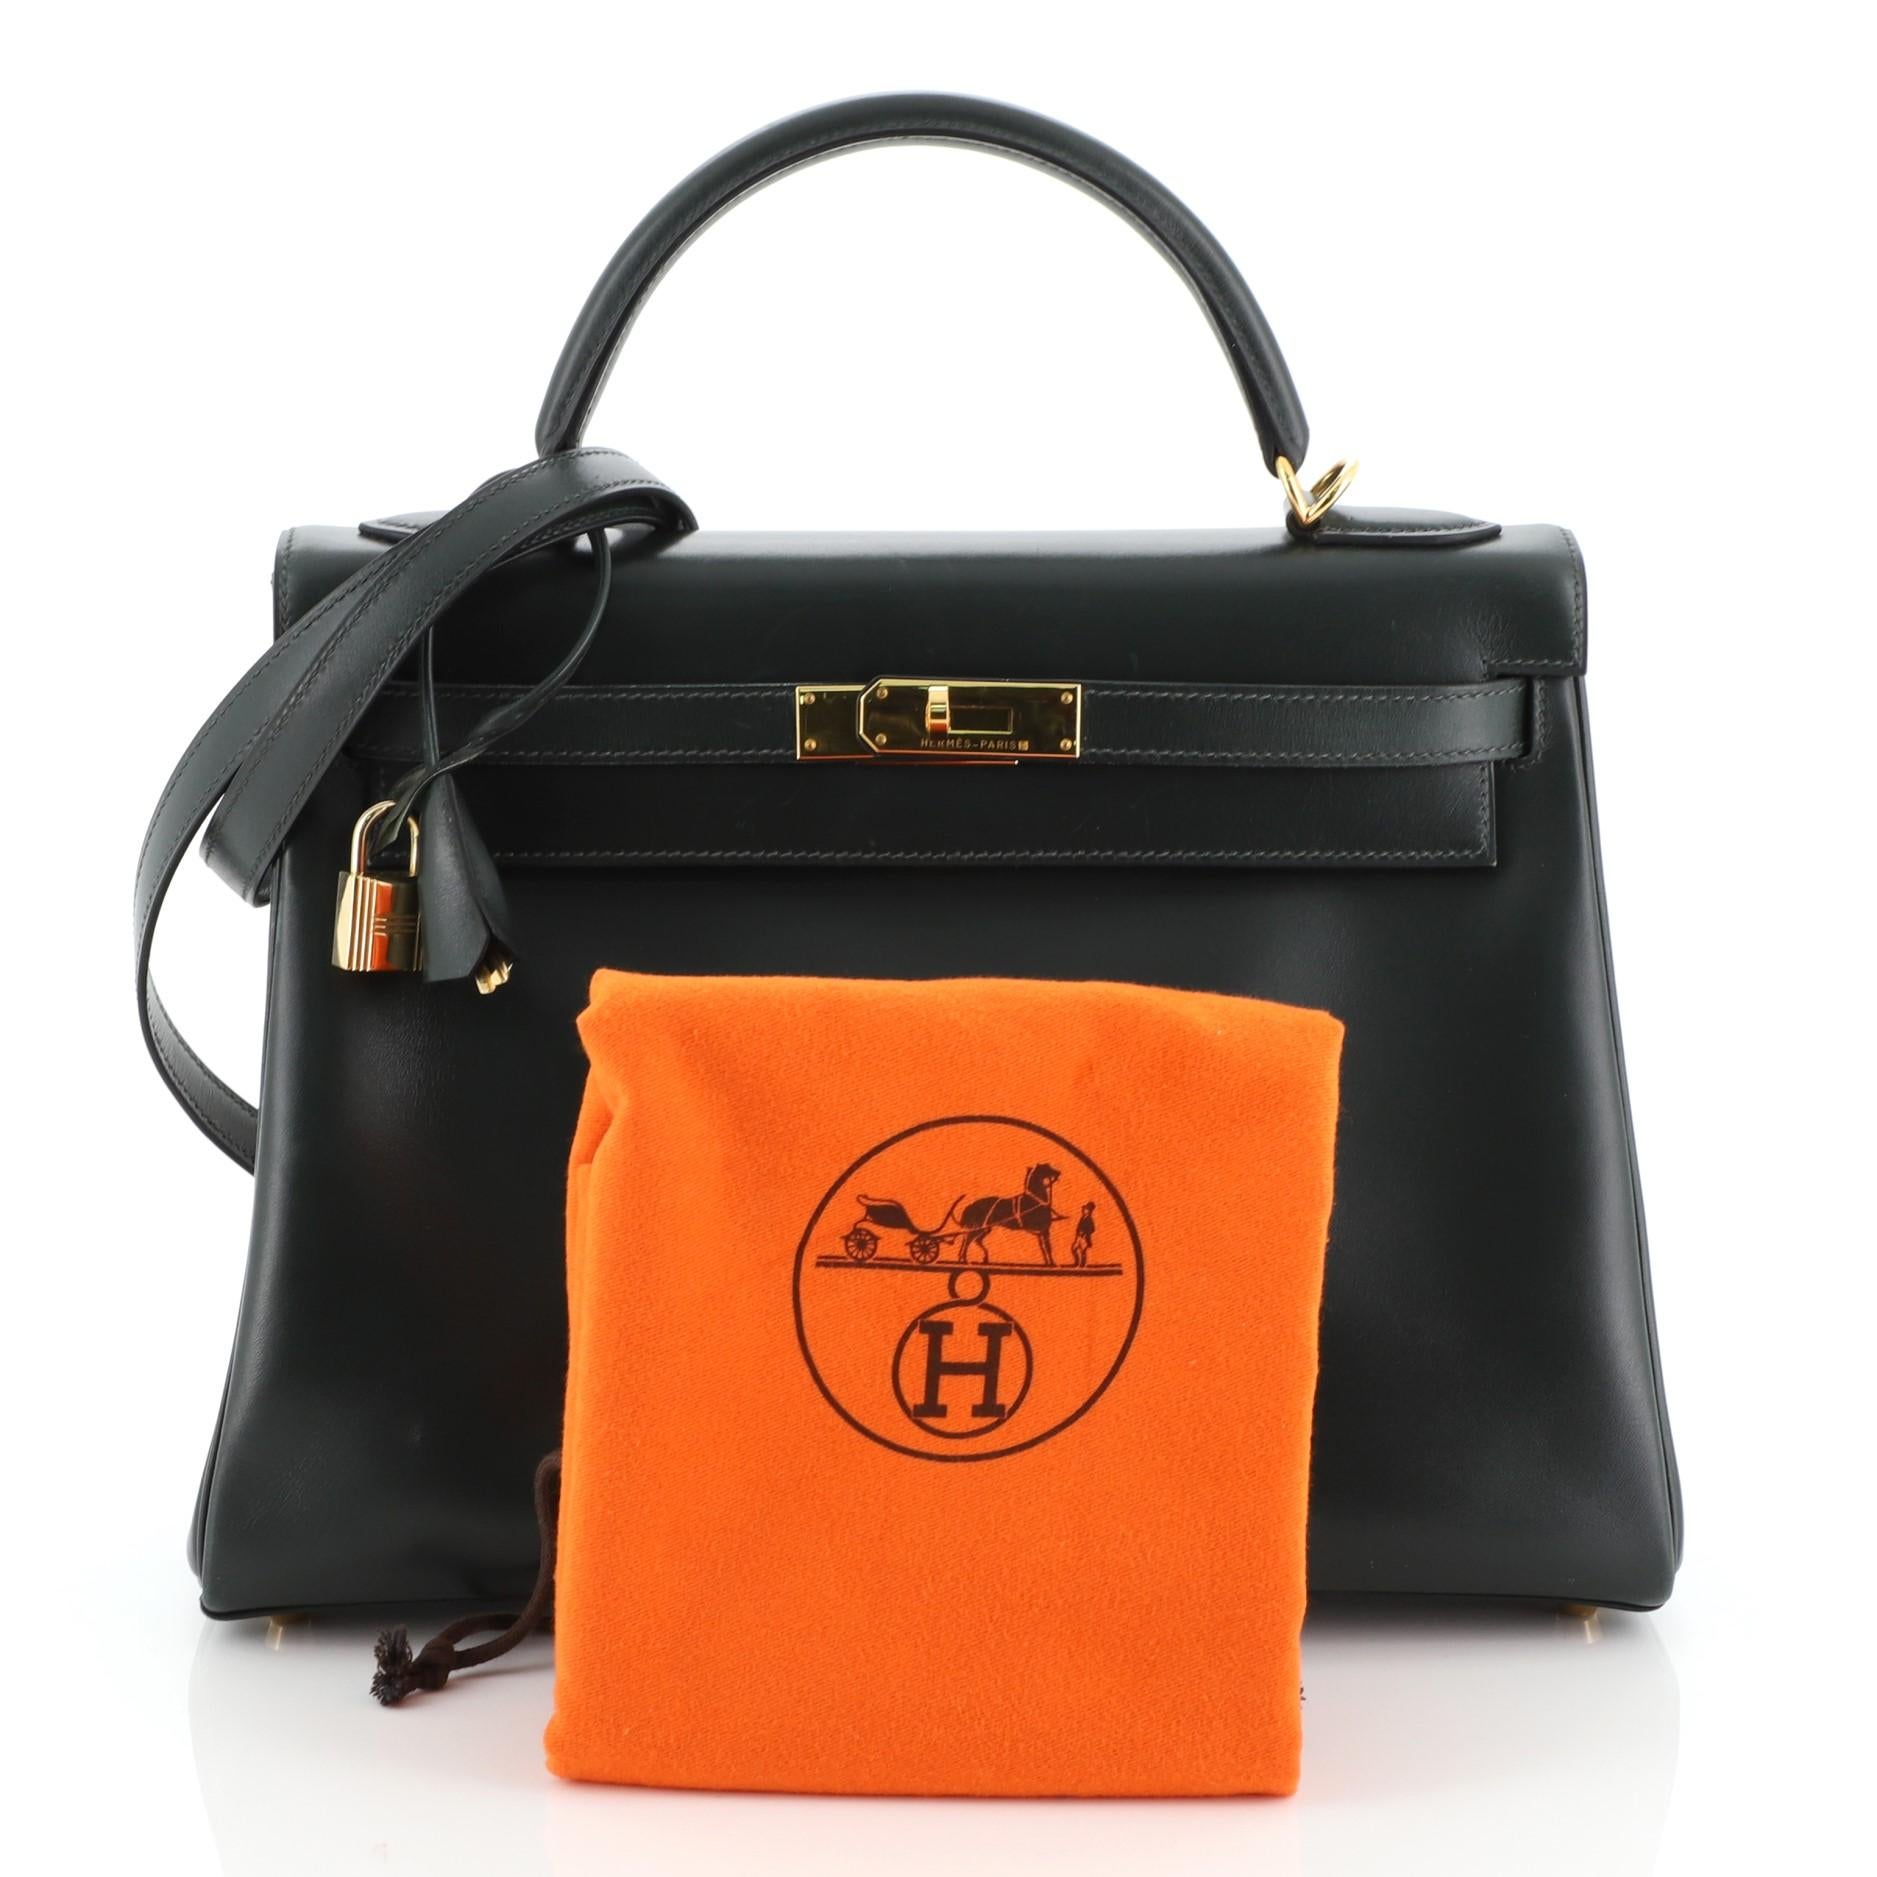 This Hermes Kelly Handbag Vert Fonce Box Calf with Gold Hardware 32, crafted in Vert Fonce green Box Calf leather, features single top handle, protective base studs, and gold hardware. Its turn-lock closure opens to a Vert Fonce green Chevre leather